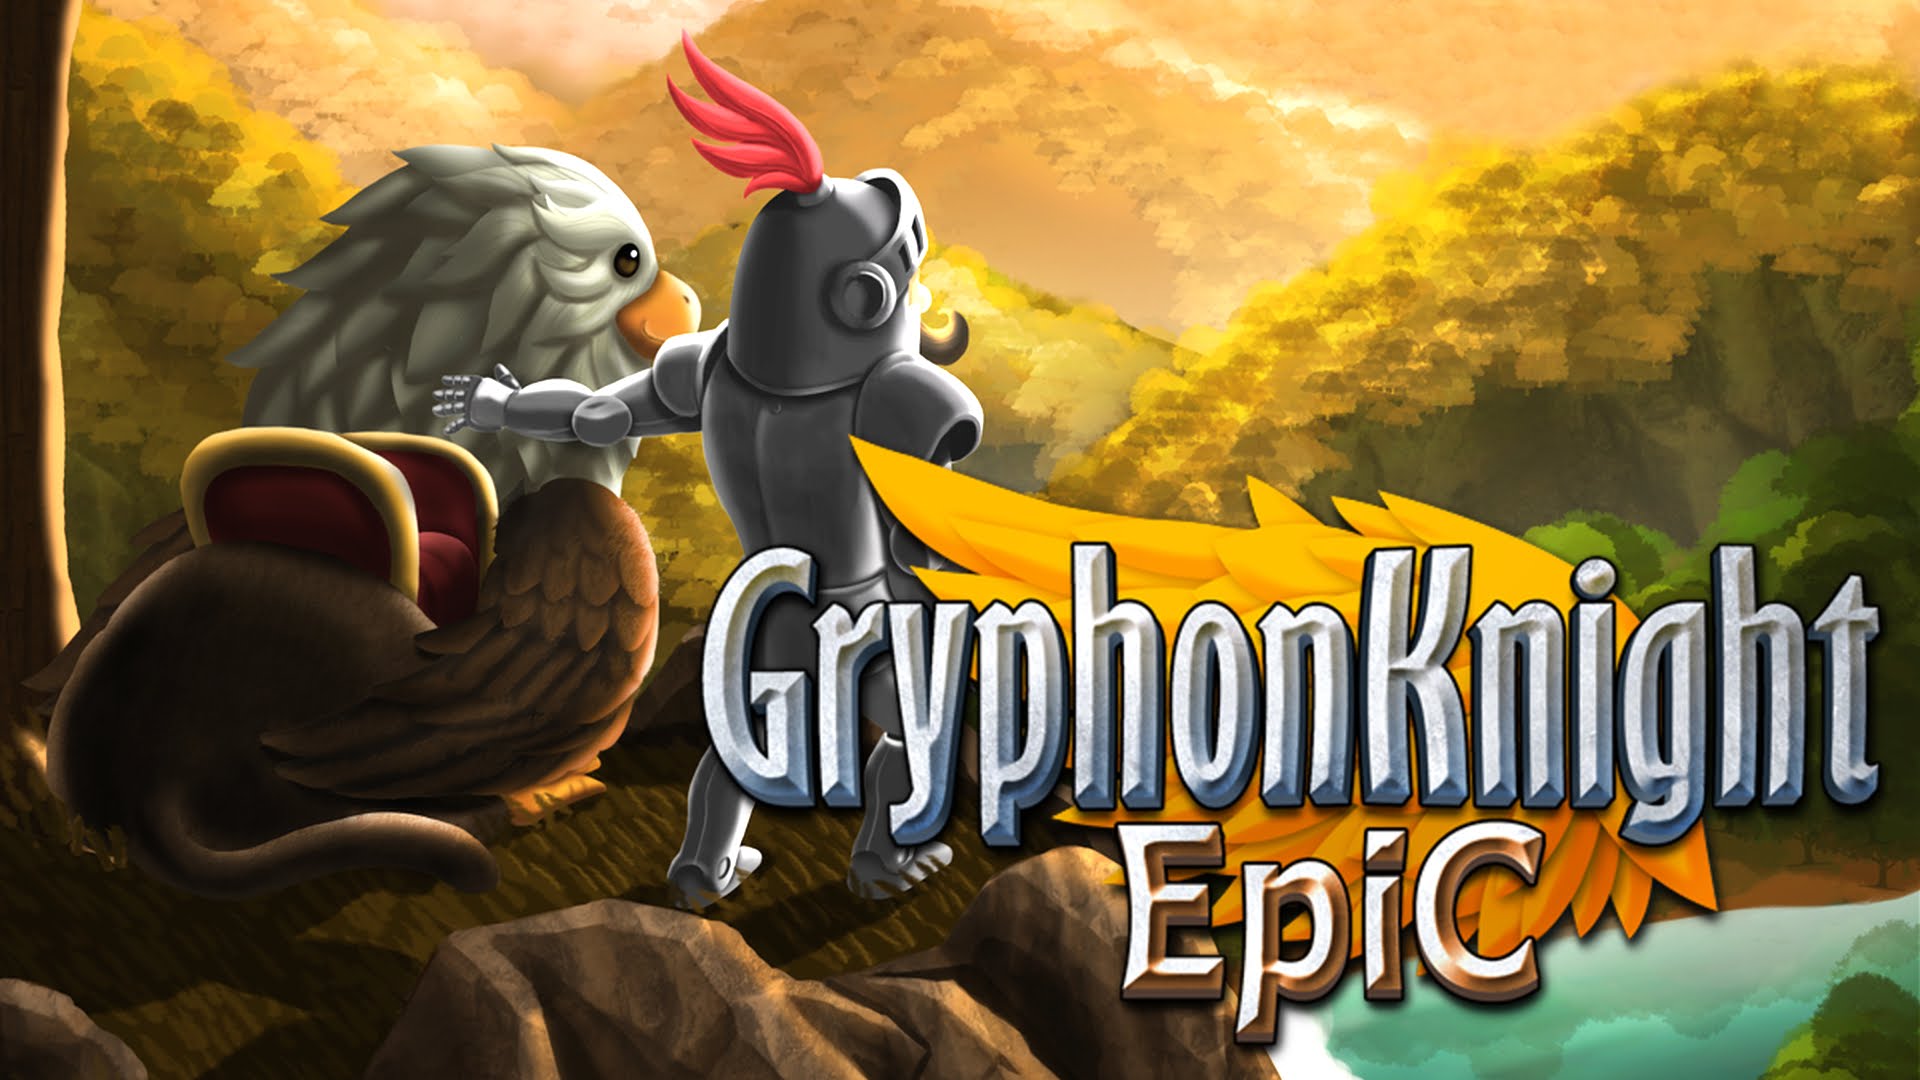 Gryphon Knight Epic - Xbox One